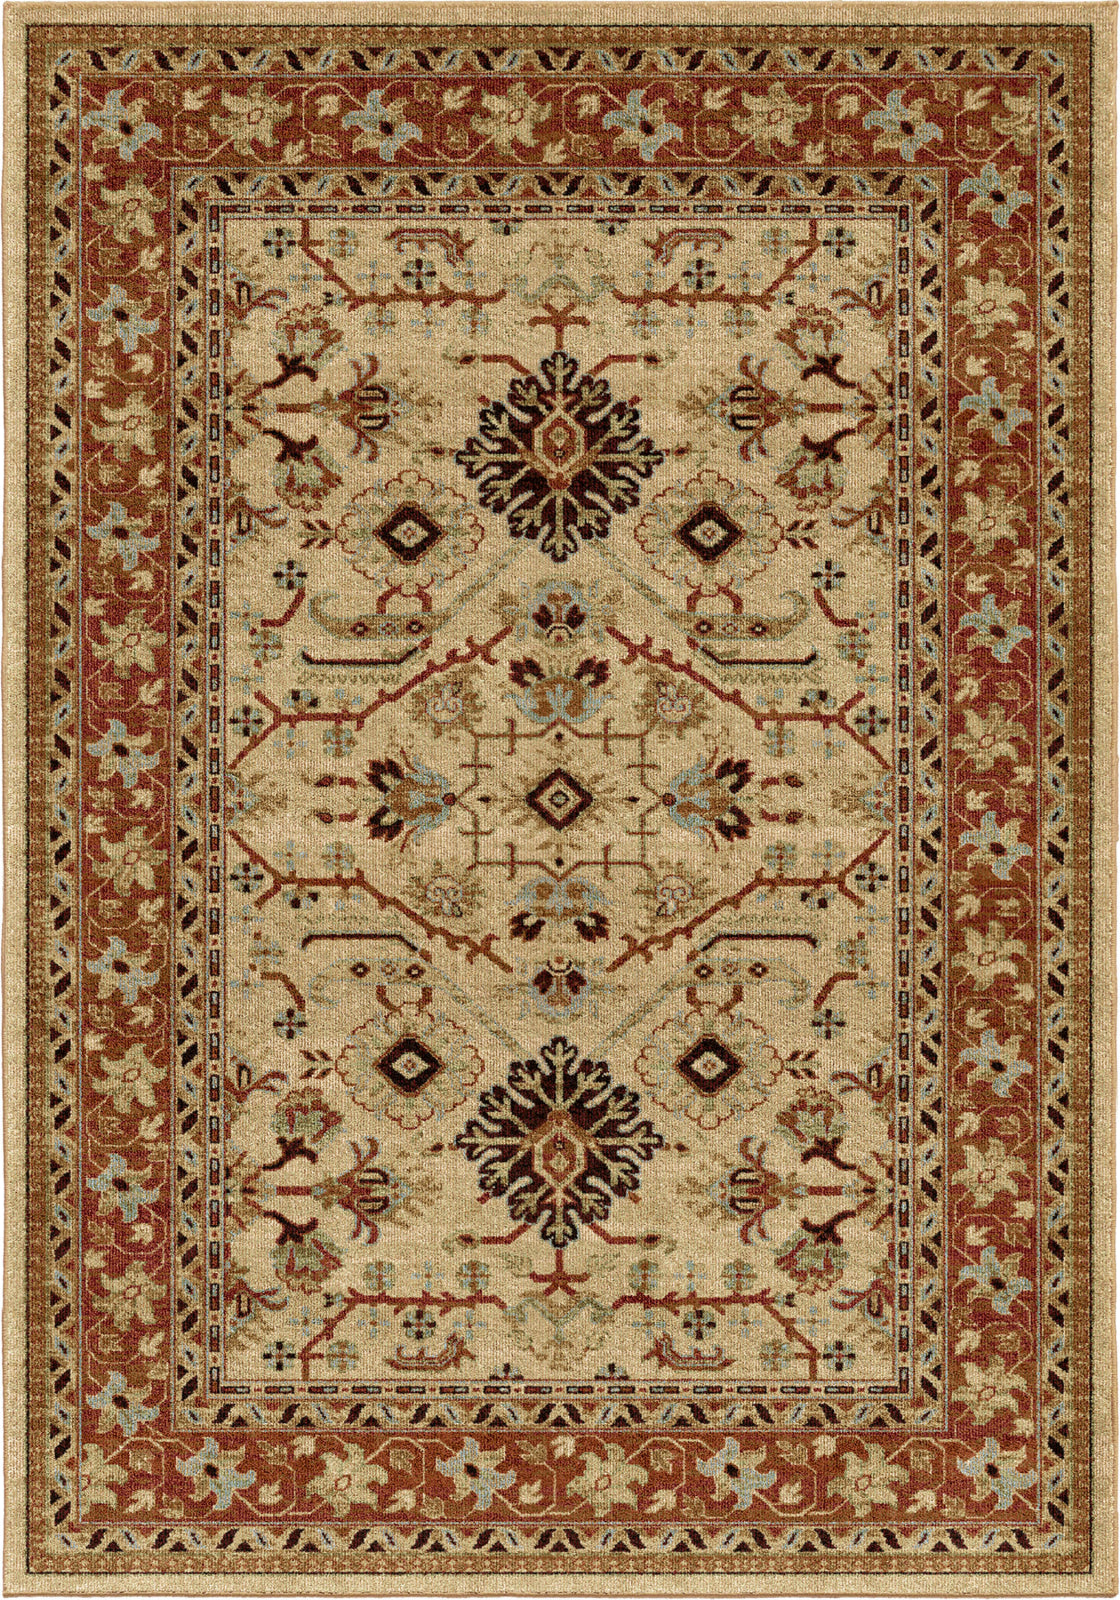 Orian Rugs Aria Kashmir Bisque Area Rug by Palmetto Living main image